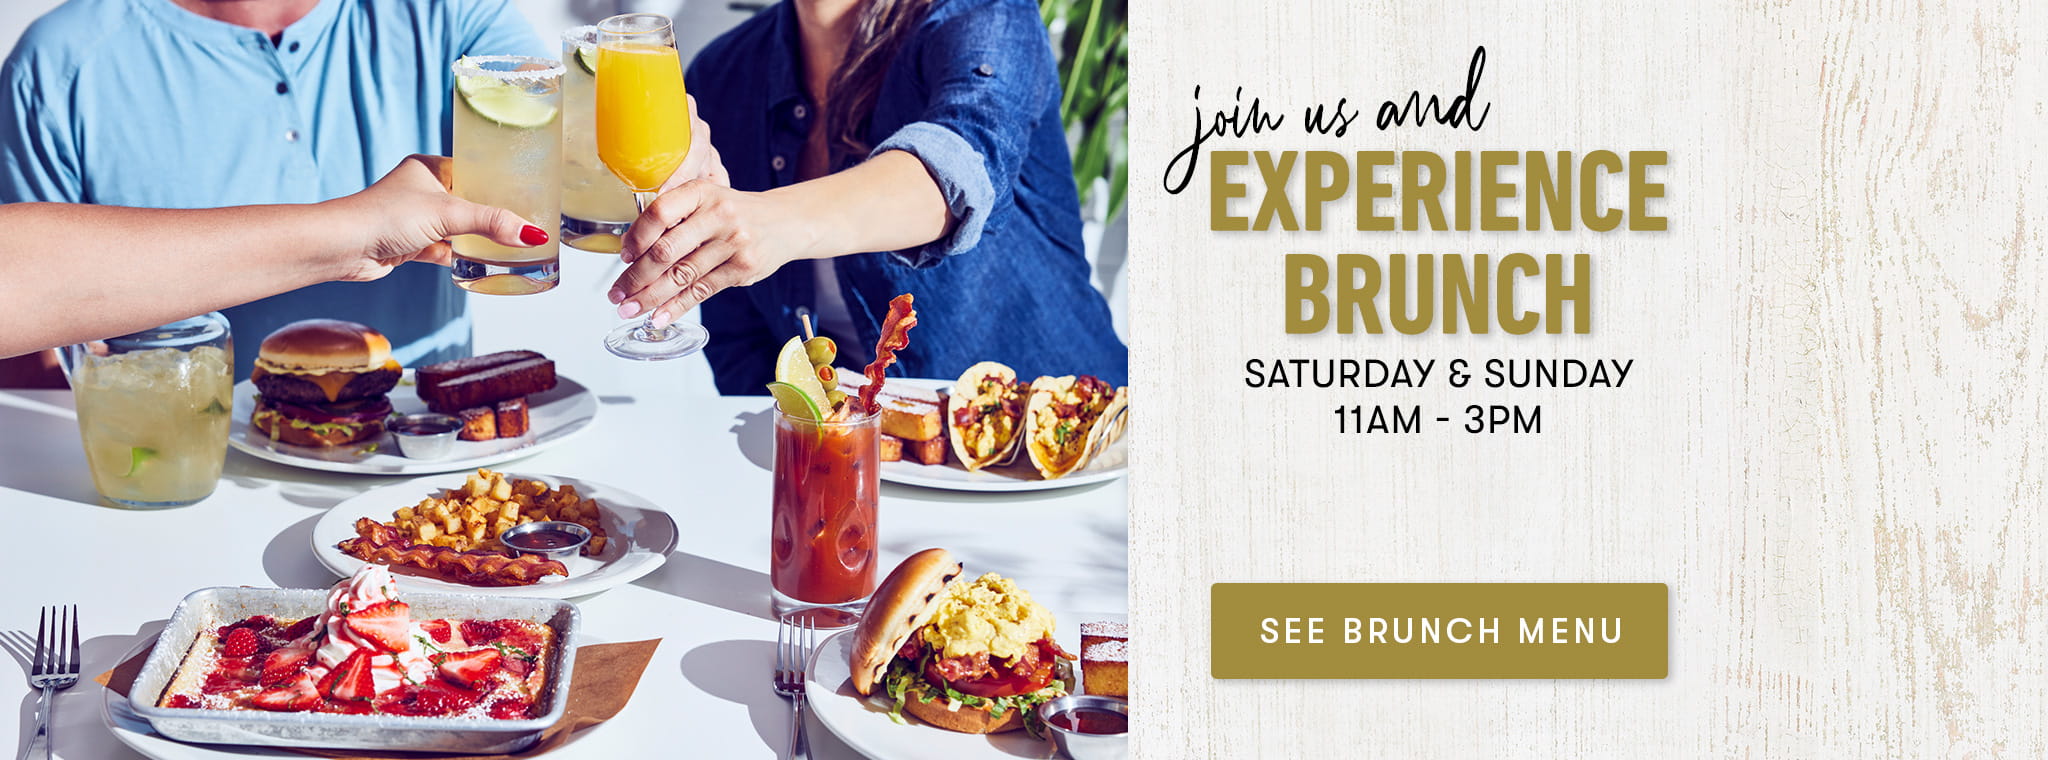 Join us and experience brunch Saturday & Sunday 11AM-3PM